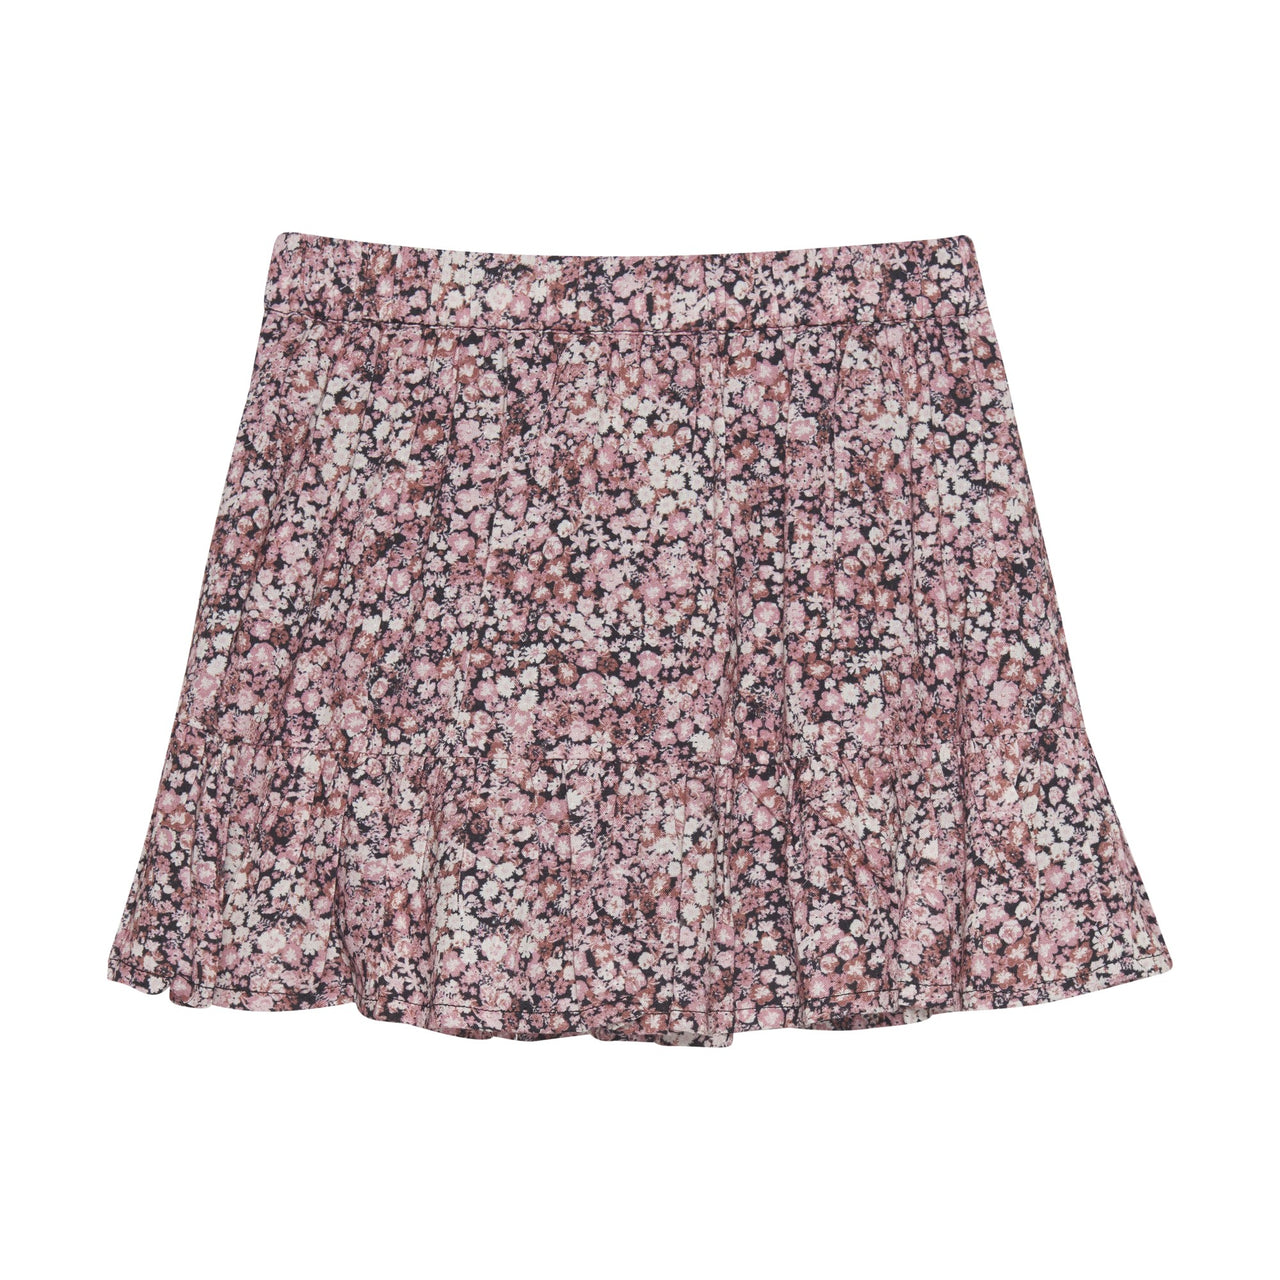 Small Floral Skirt